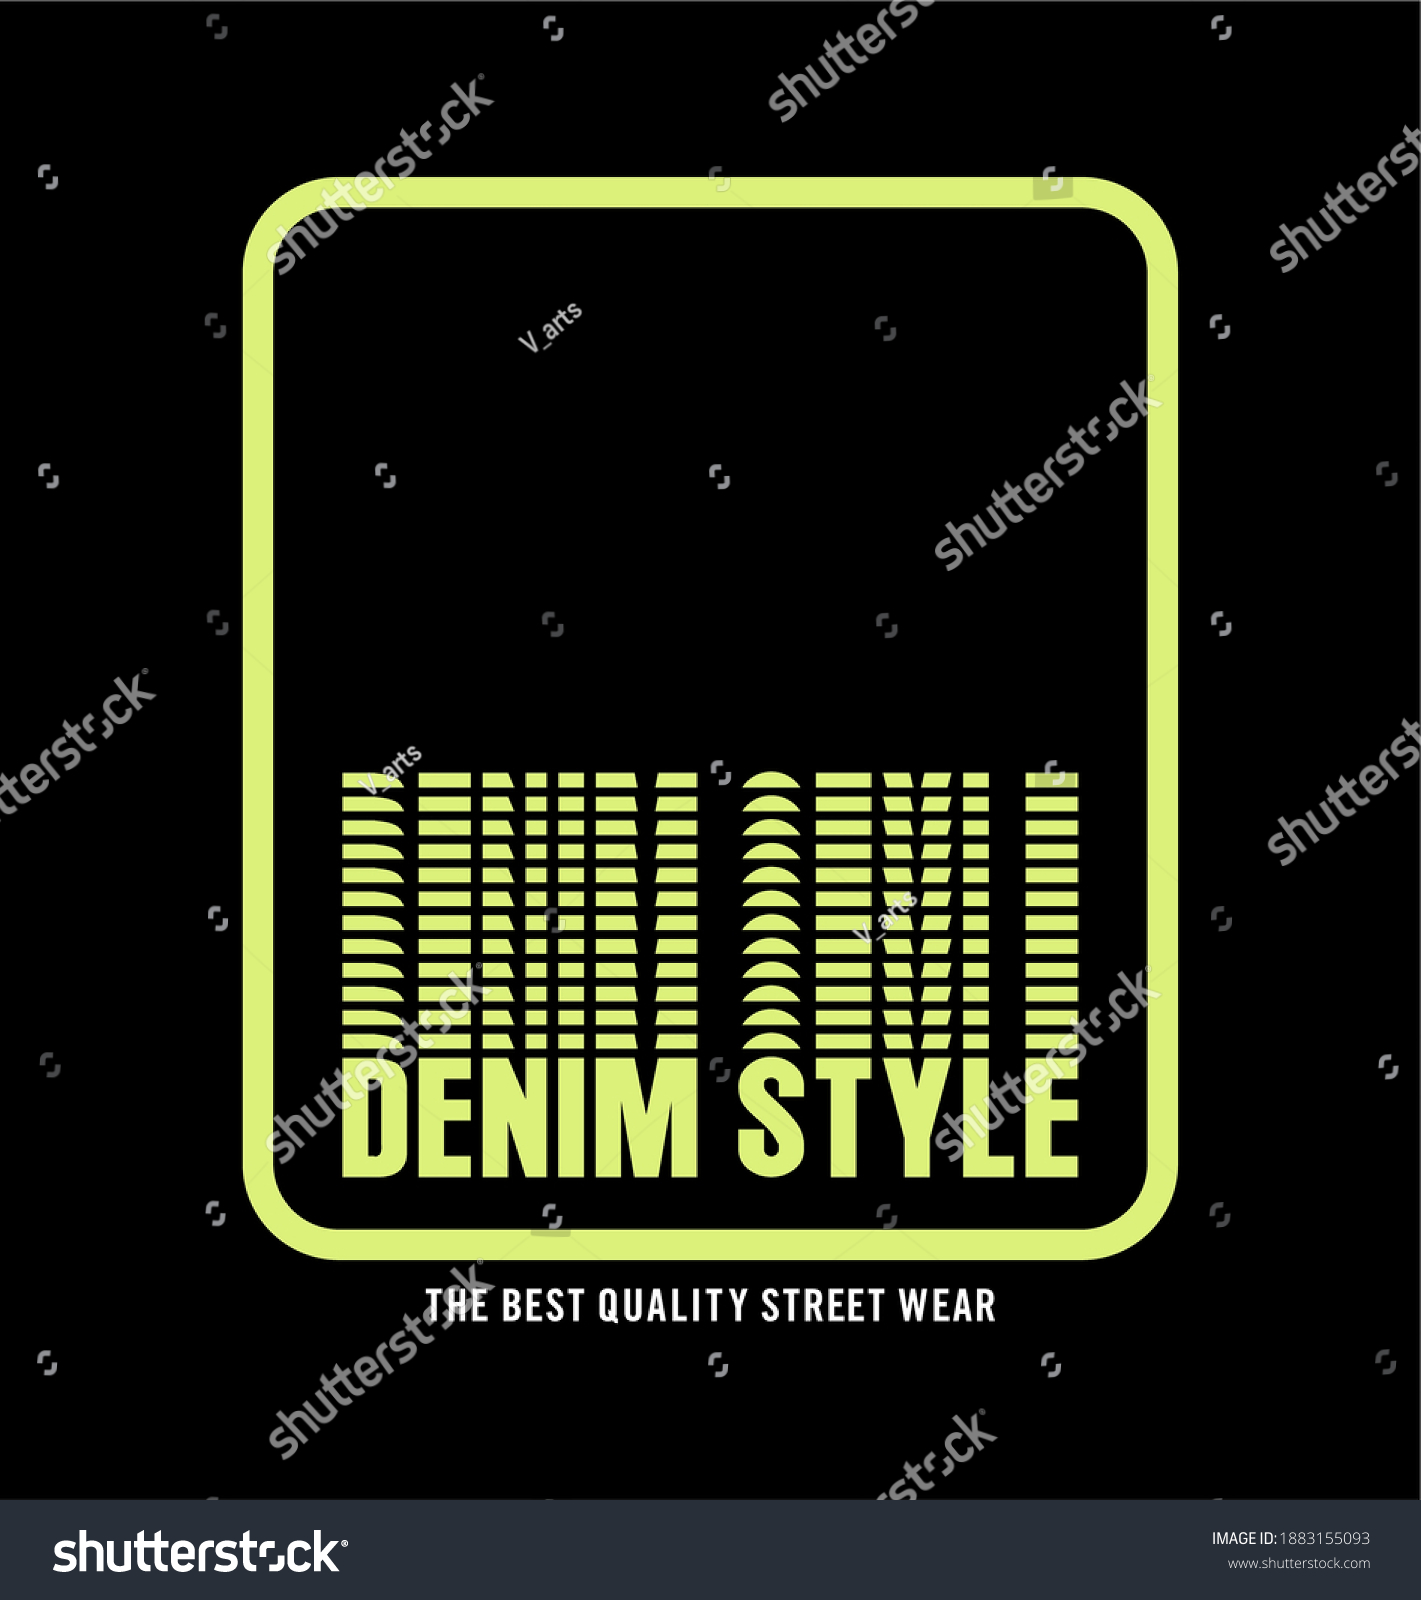 Denim Style Design Typography Square Background Stock Vector (Royalty ...